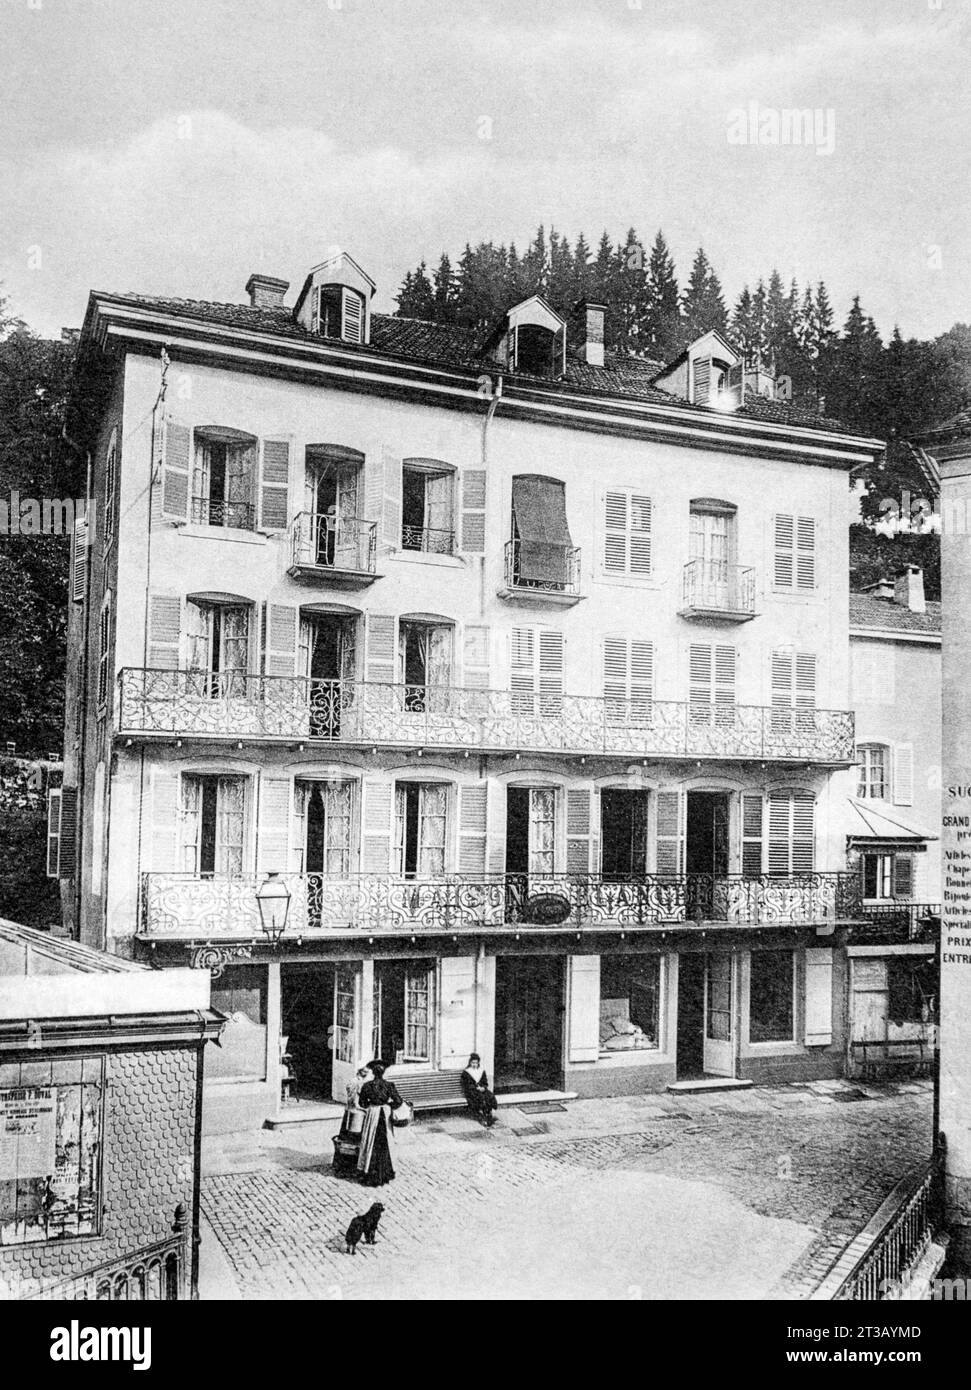 Photography , The white house of the town of Plombieres les Bains in 1903, Plombières-les-Bains, nicknamed the City of a Thousand Balconies, is a very fashionable spa resort at different times and notably in the 19th century, under Louis-Philippe I and Napoleon III . Stock Photo